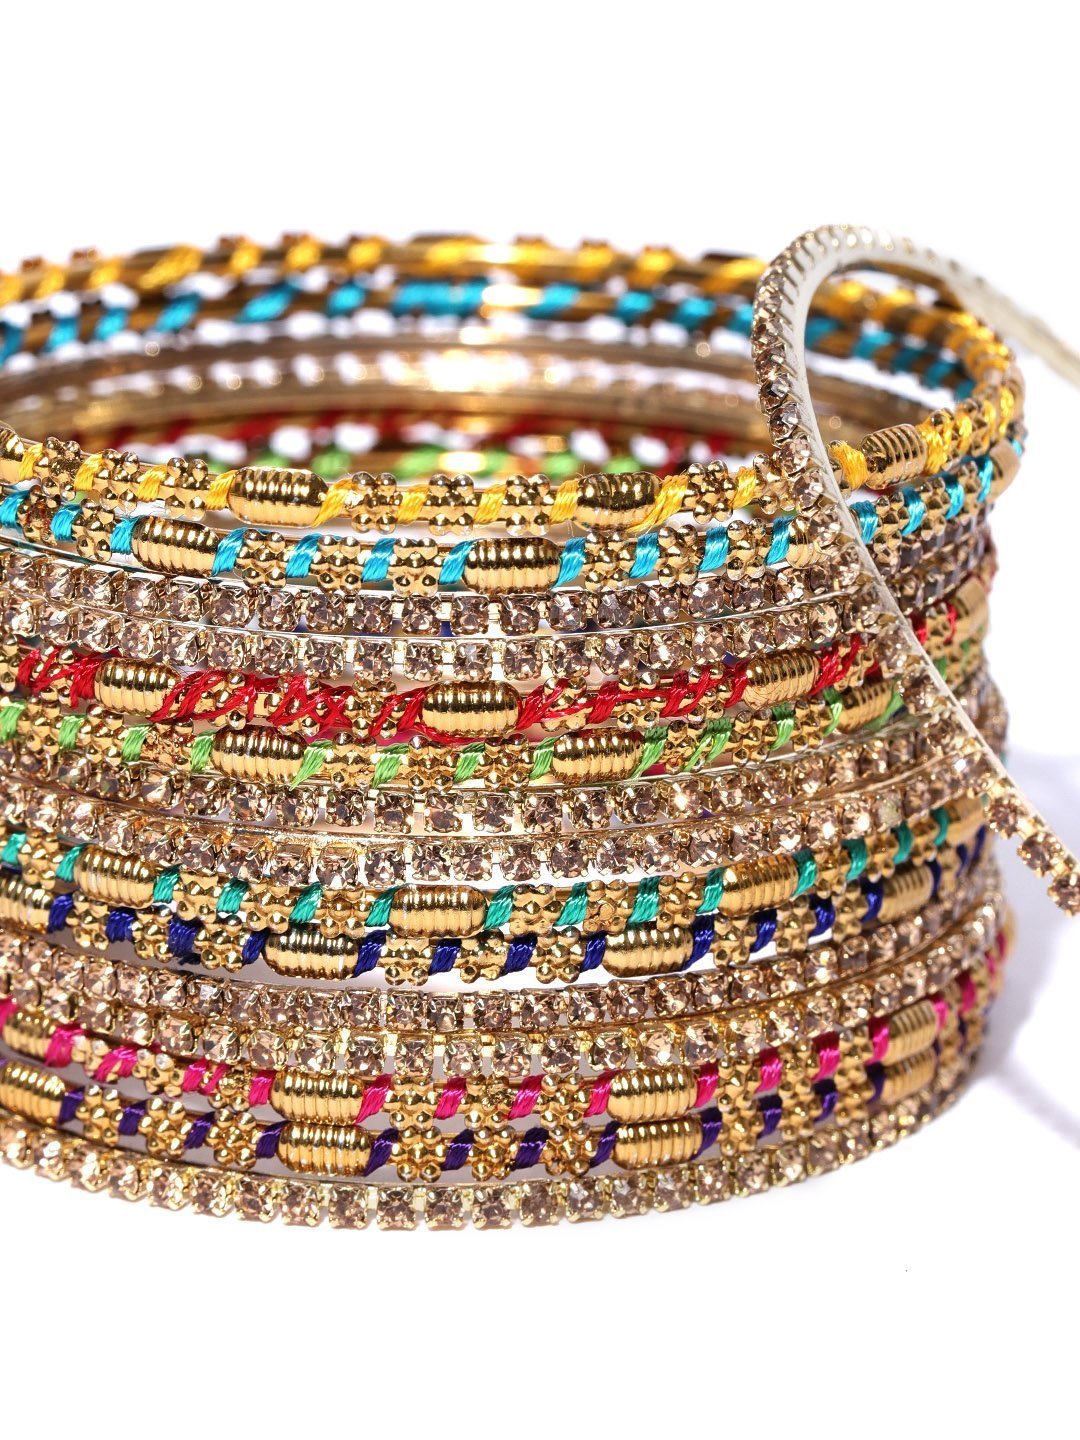 Women's Set of 16 Multicolour Thread Work and Stones Studded Bangles - Priyaasi